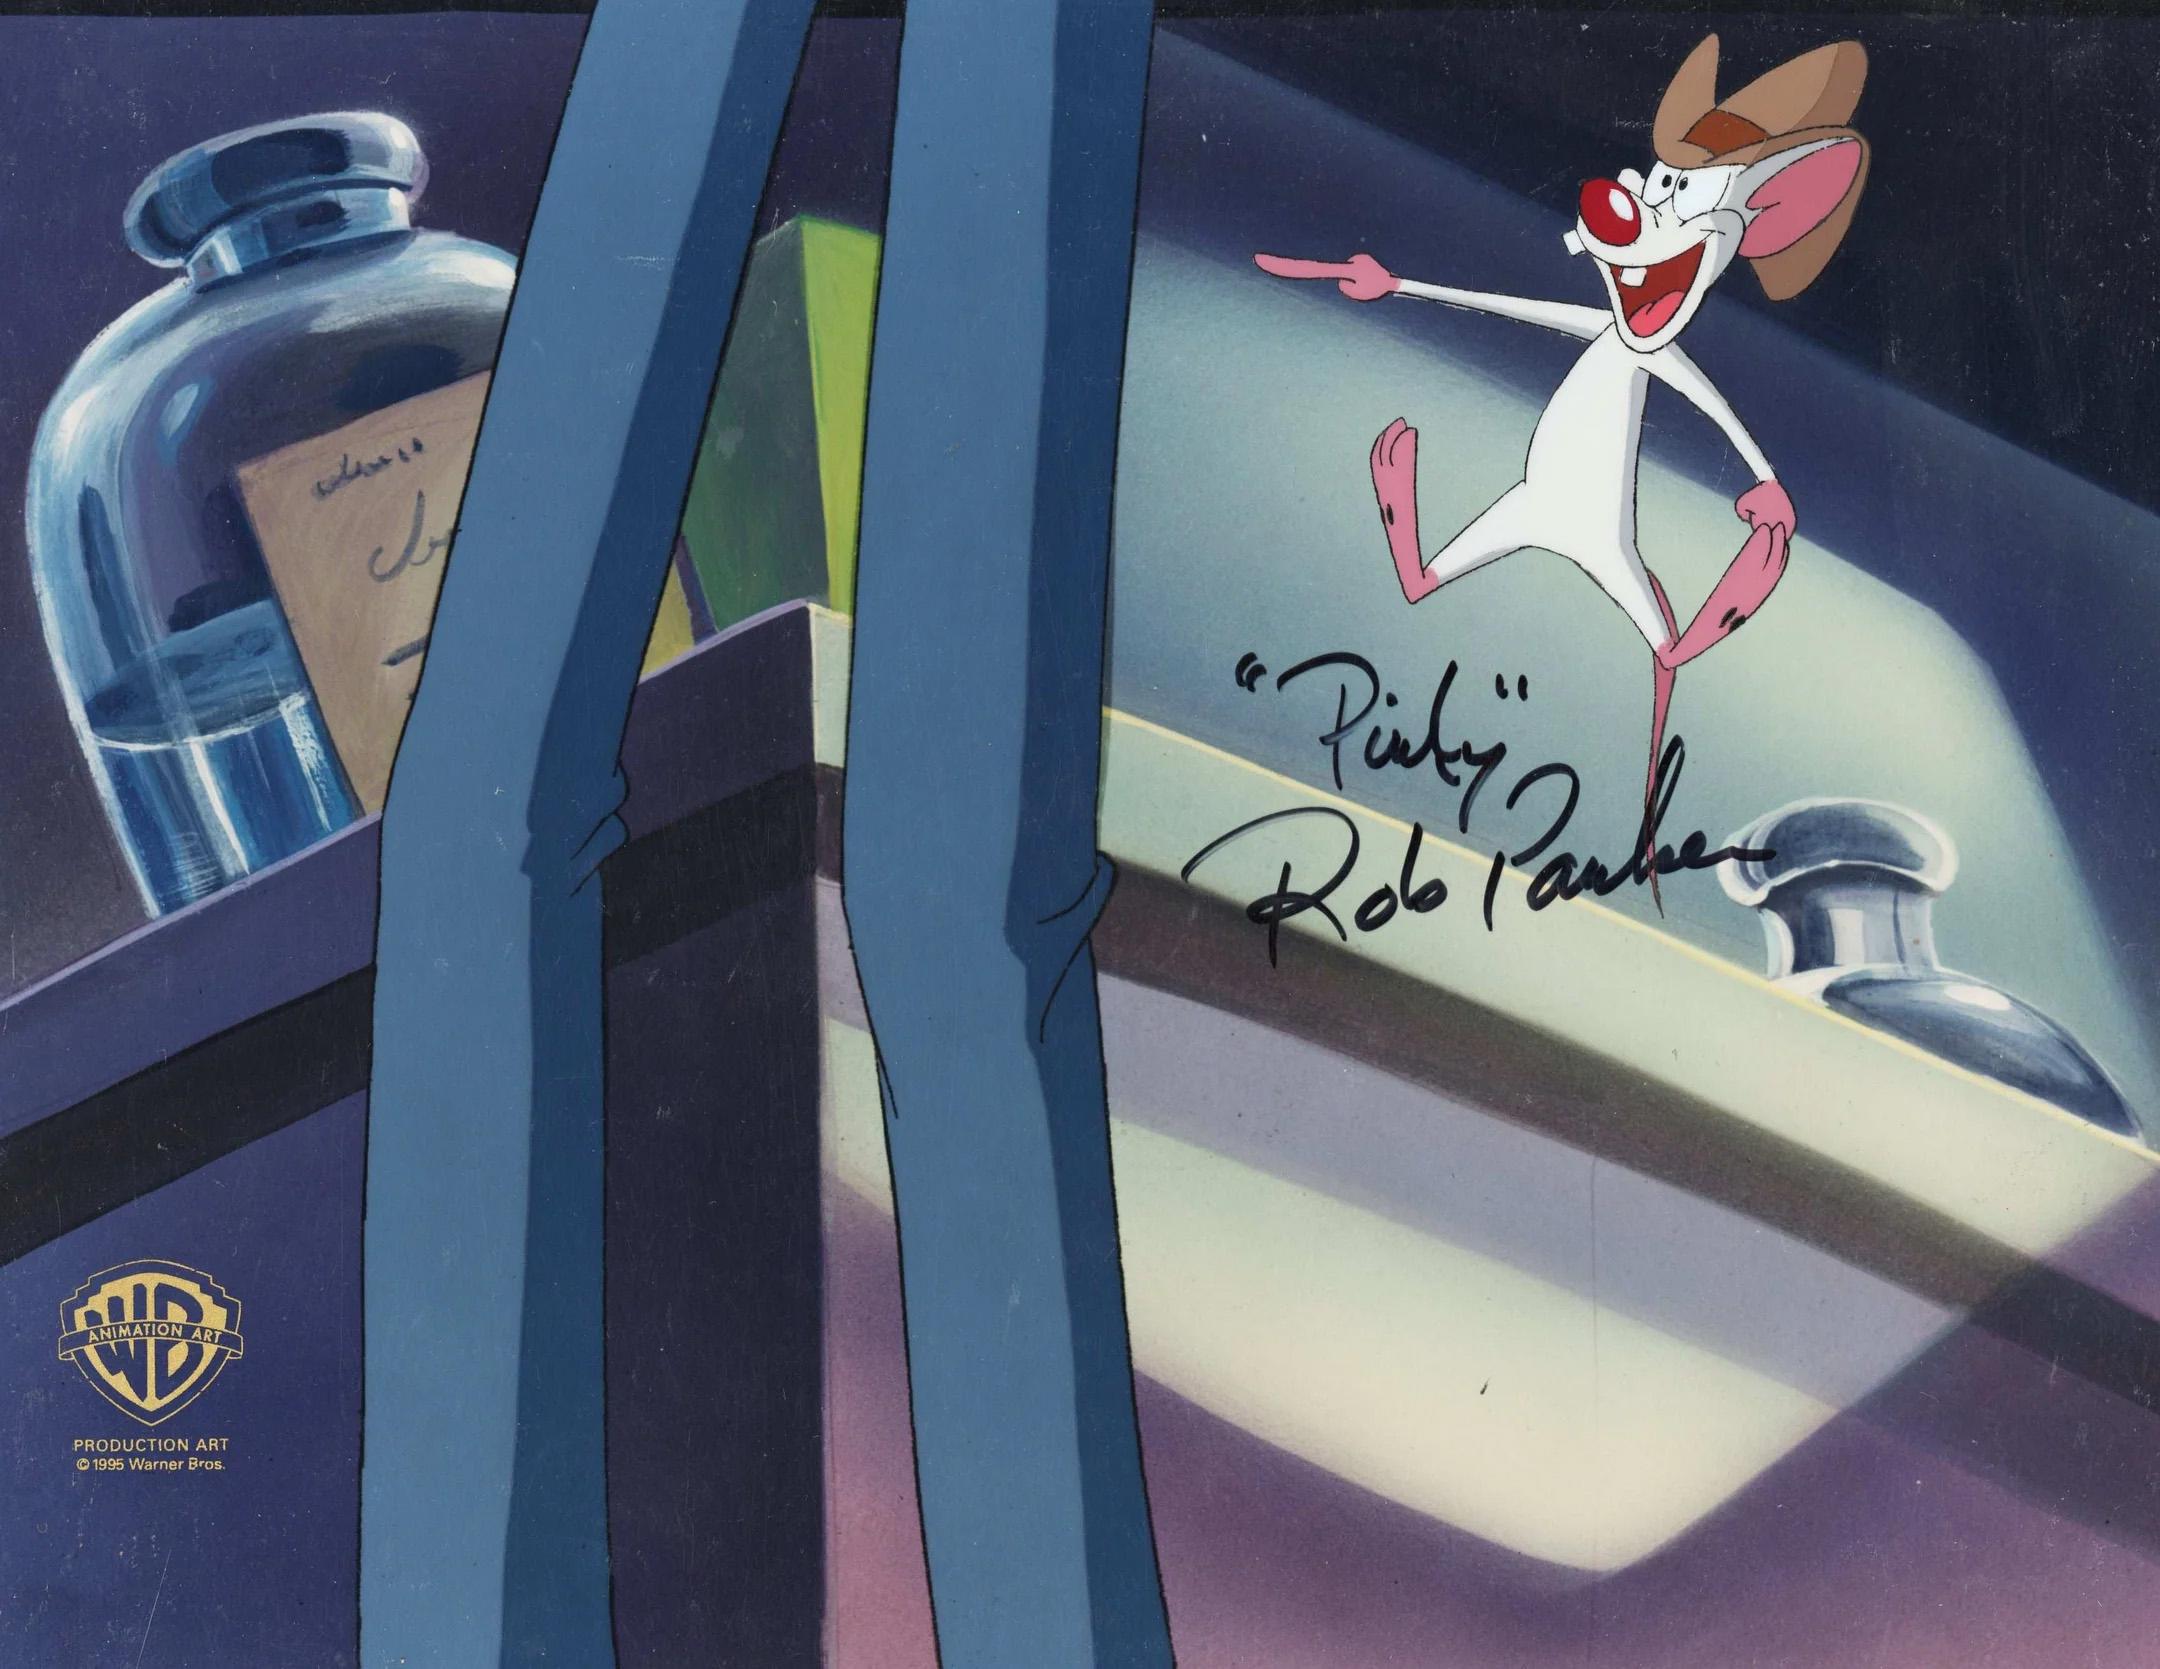 Pinky And The Brain Original Production Cel Signed by Rob Paula: Pinky - Art by Warner Bros. Studio Artists